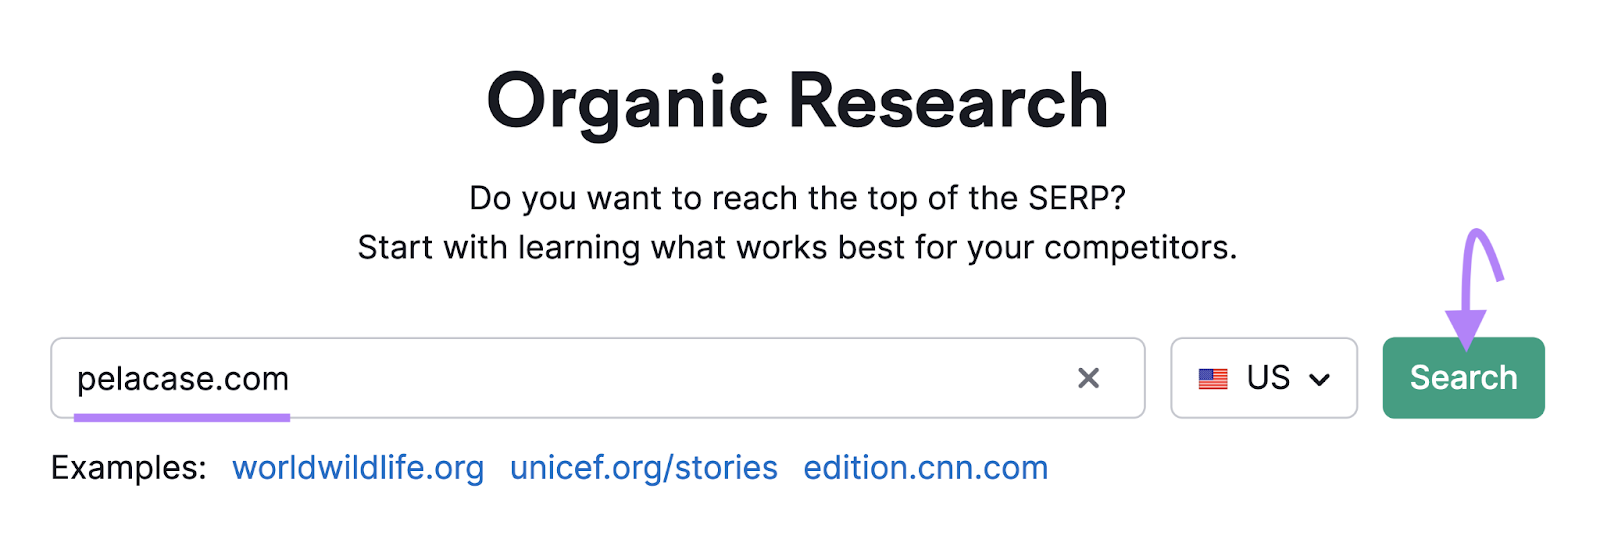 "pelacase.com" domain entered into the Organic Research search bar